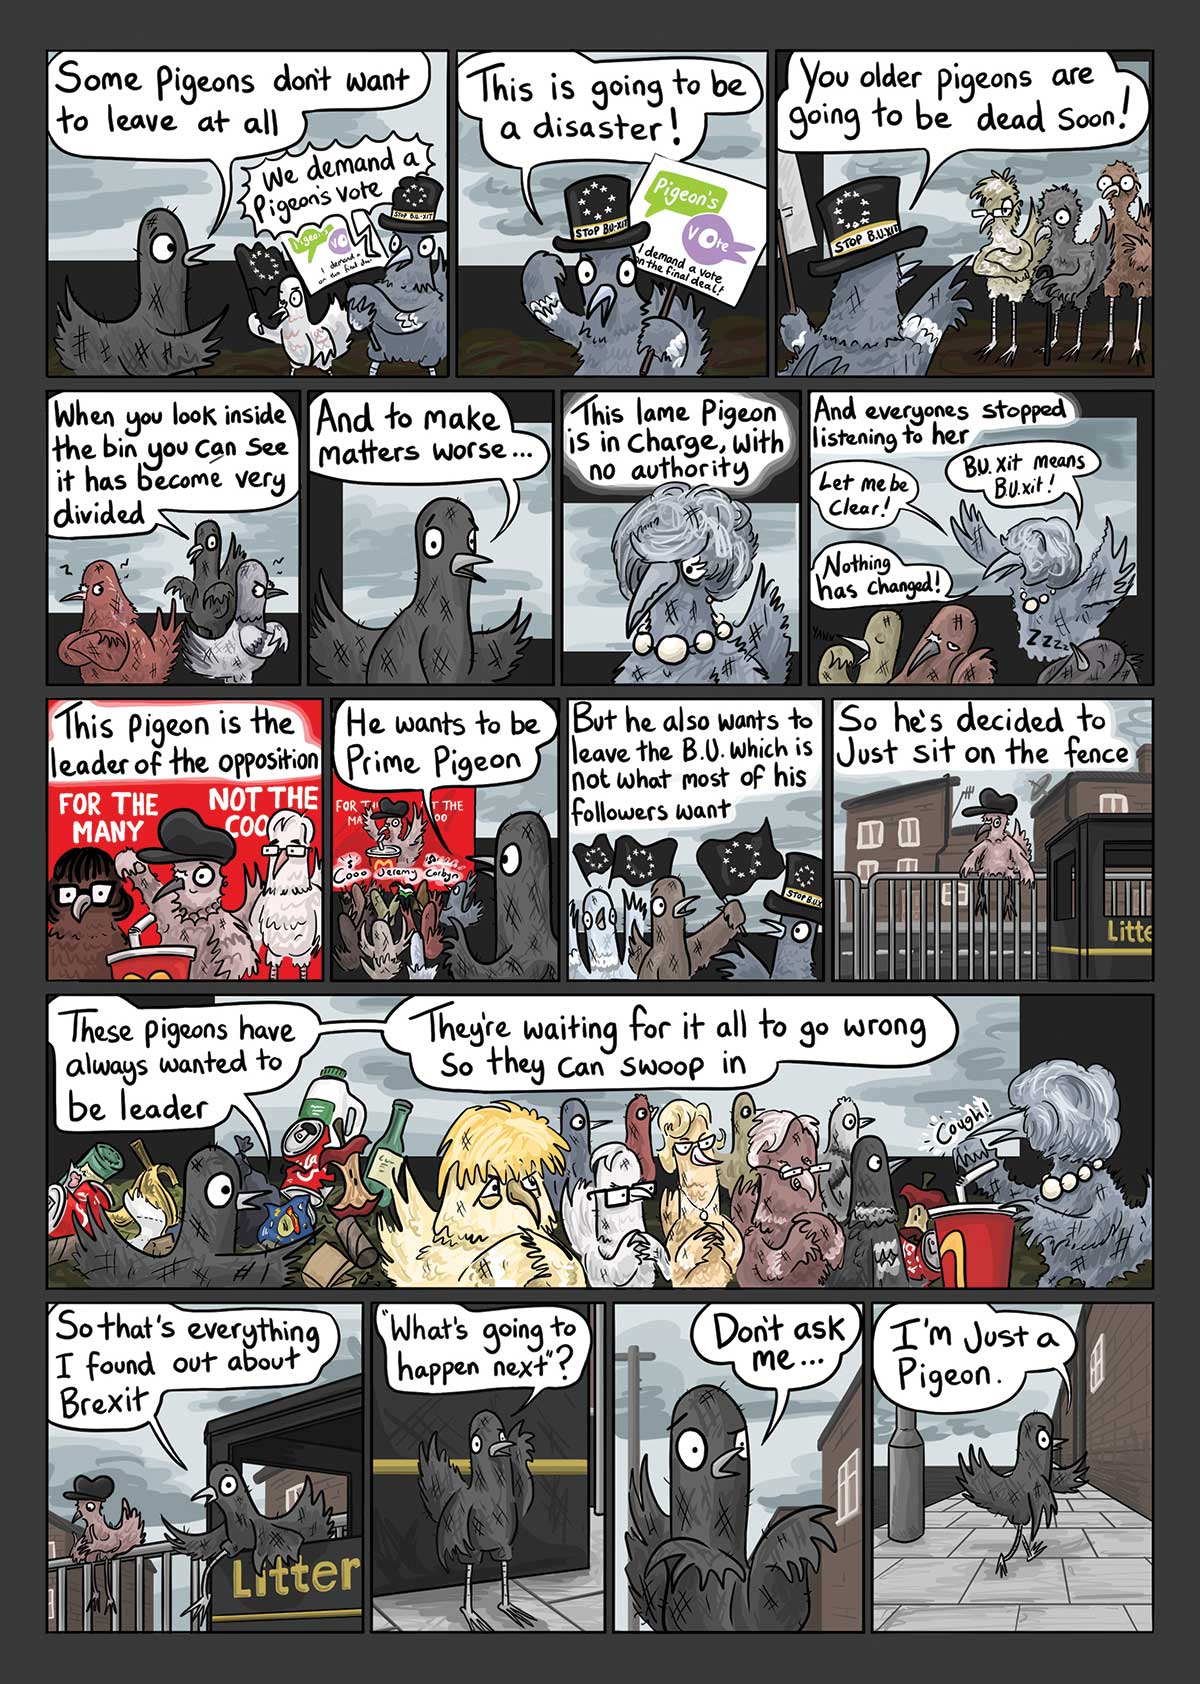 The Zoom! - Issue 13 - Page 10